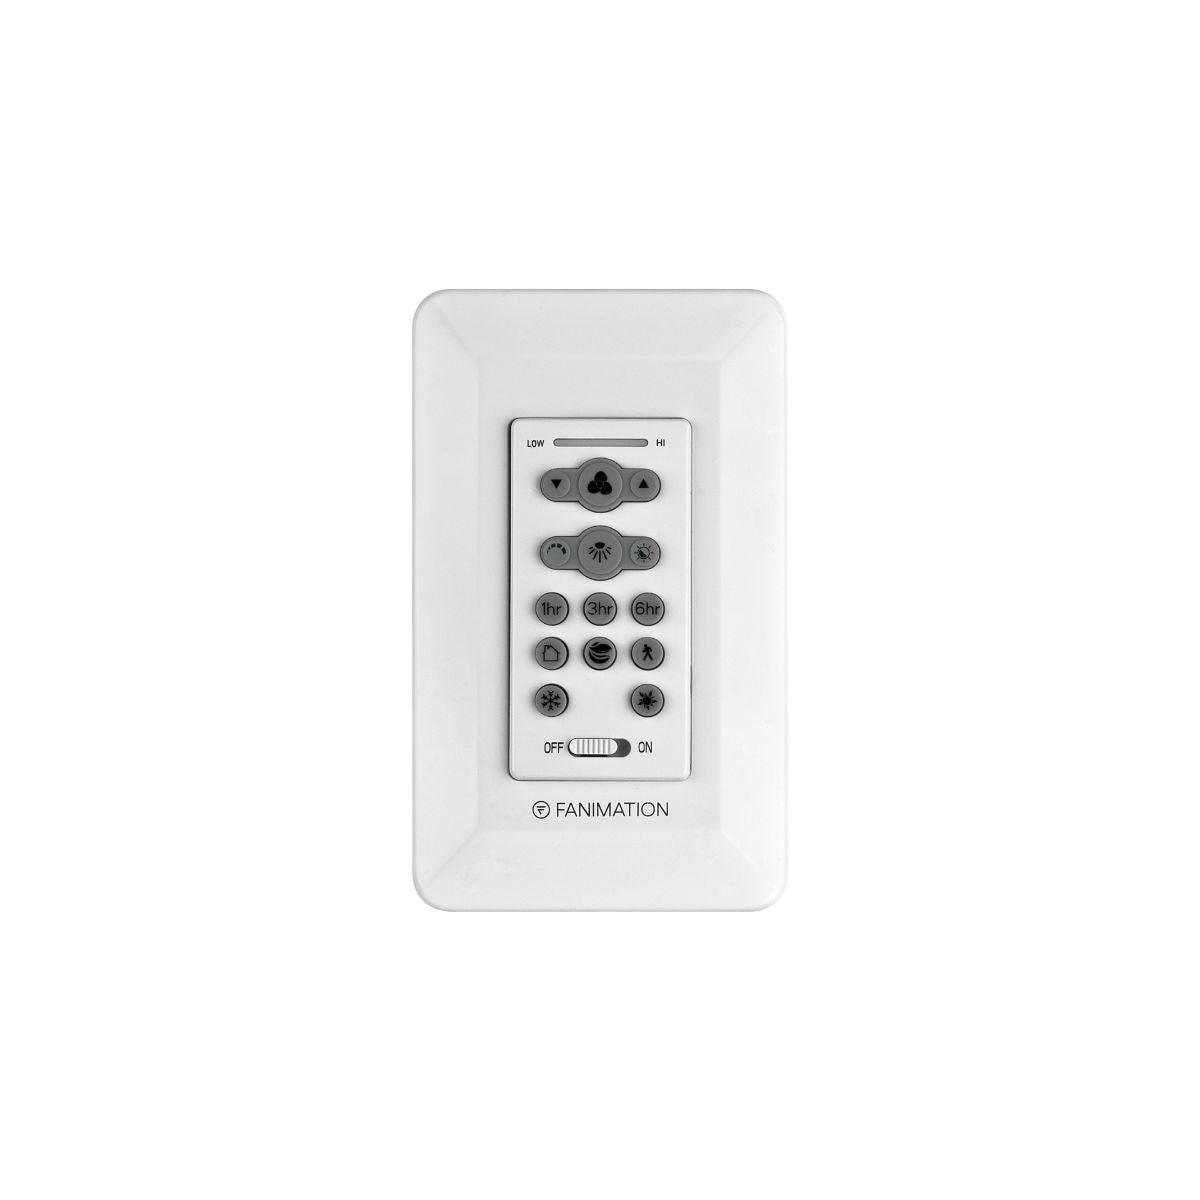 DC Motor 1.25-Amp Fully Variable Wired Touch Fan Control with Wall Plate Included, White Finish - Bees Lighting